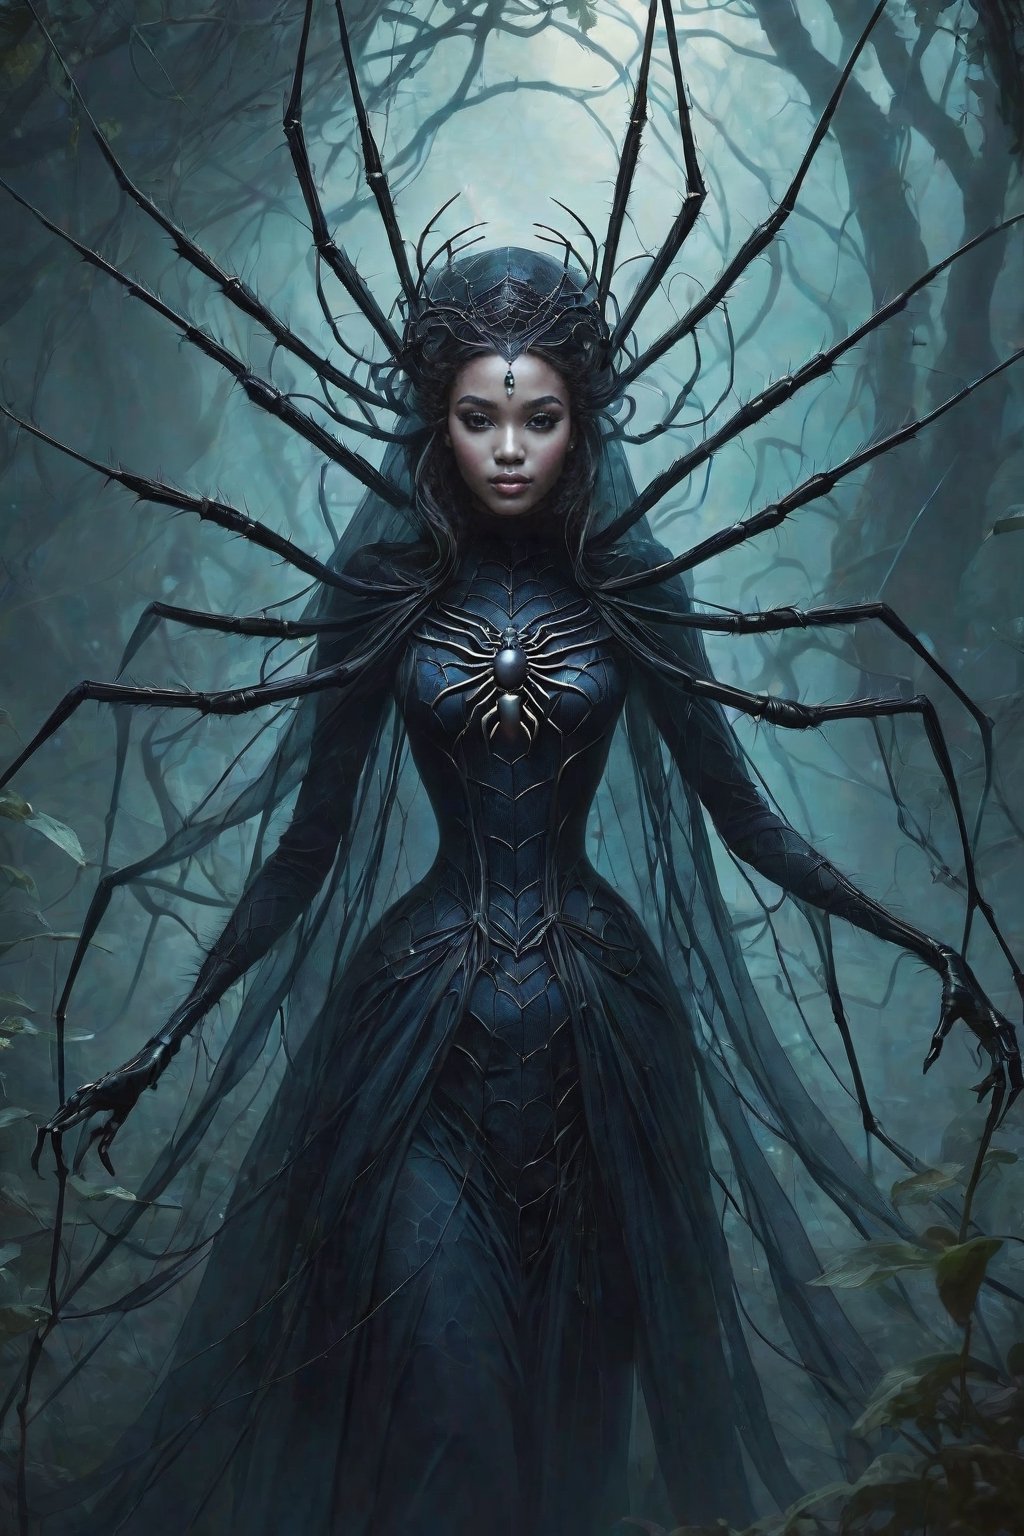 Enigmatic spider queens preside over colonies of ethereal arachnids, their veiled forms casting mysterious shadows in the hazy depths of an enchanted realm.
